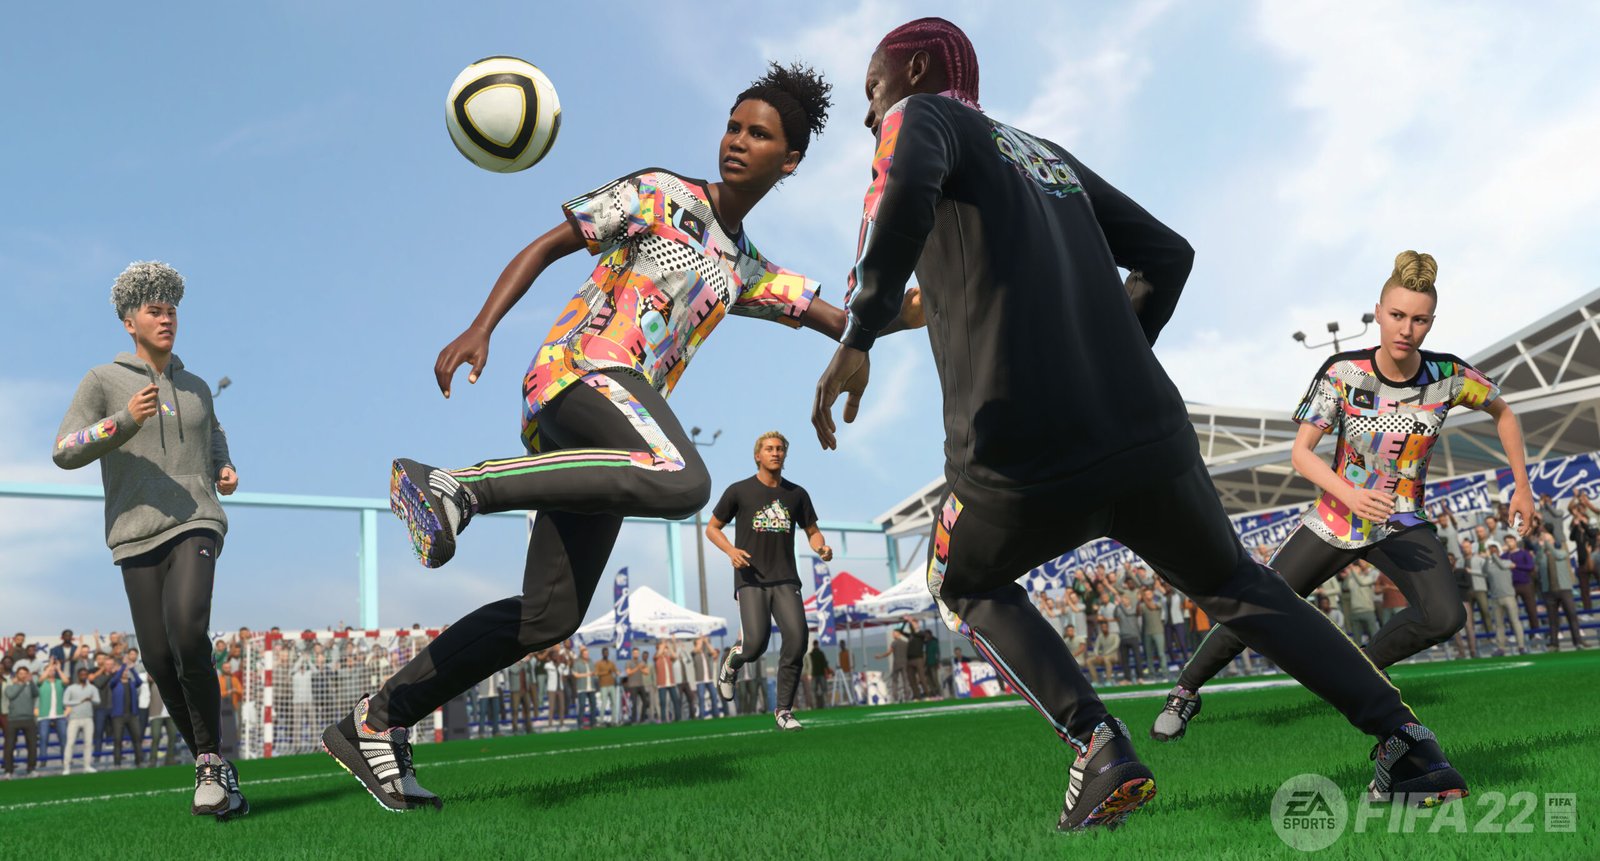 ADIDAS LAUNCHES PRIDE CONTENT SERIES INCLUDING TOM DALEY AND 2022 PRIDE COLLECTION COMES TO EA SPORTS™ FIFA 22